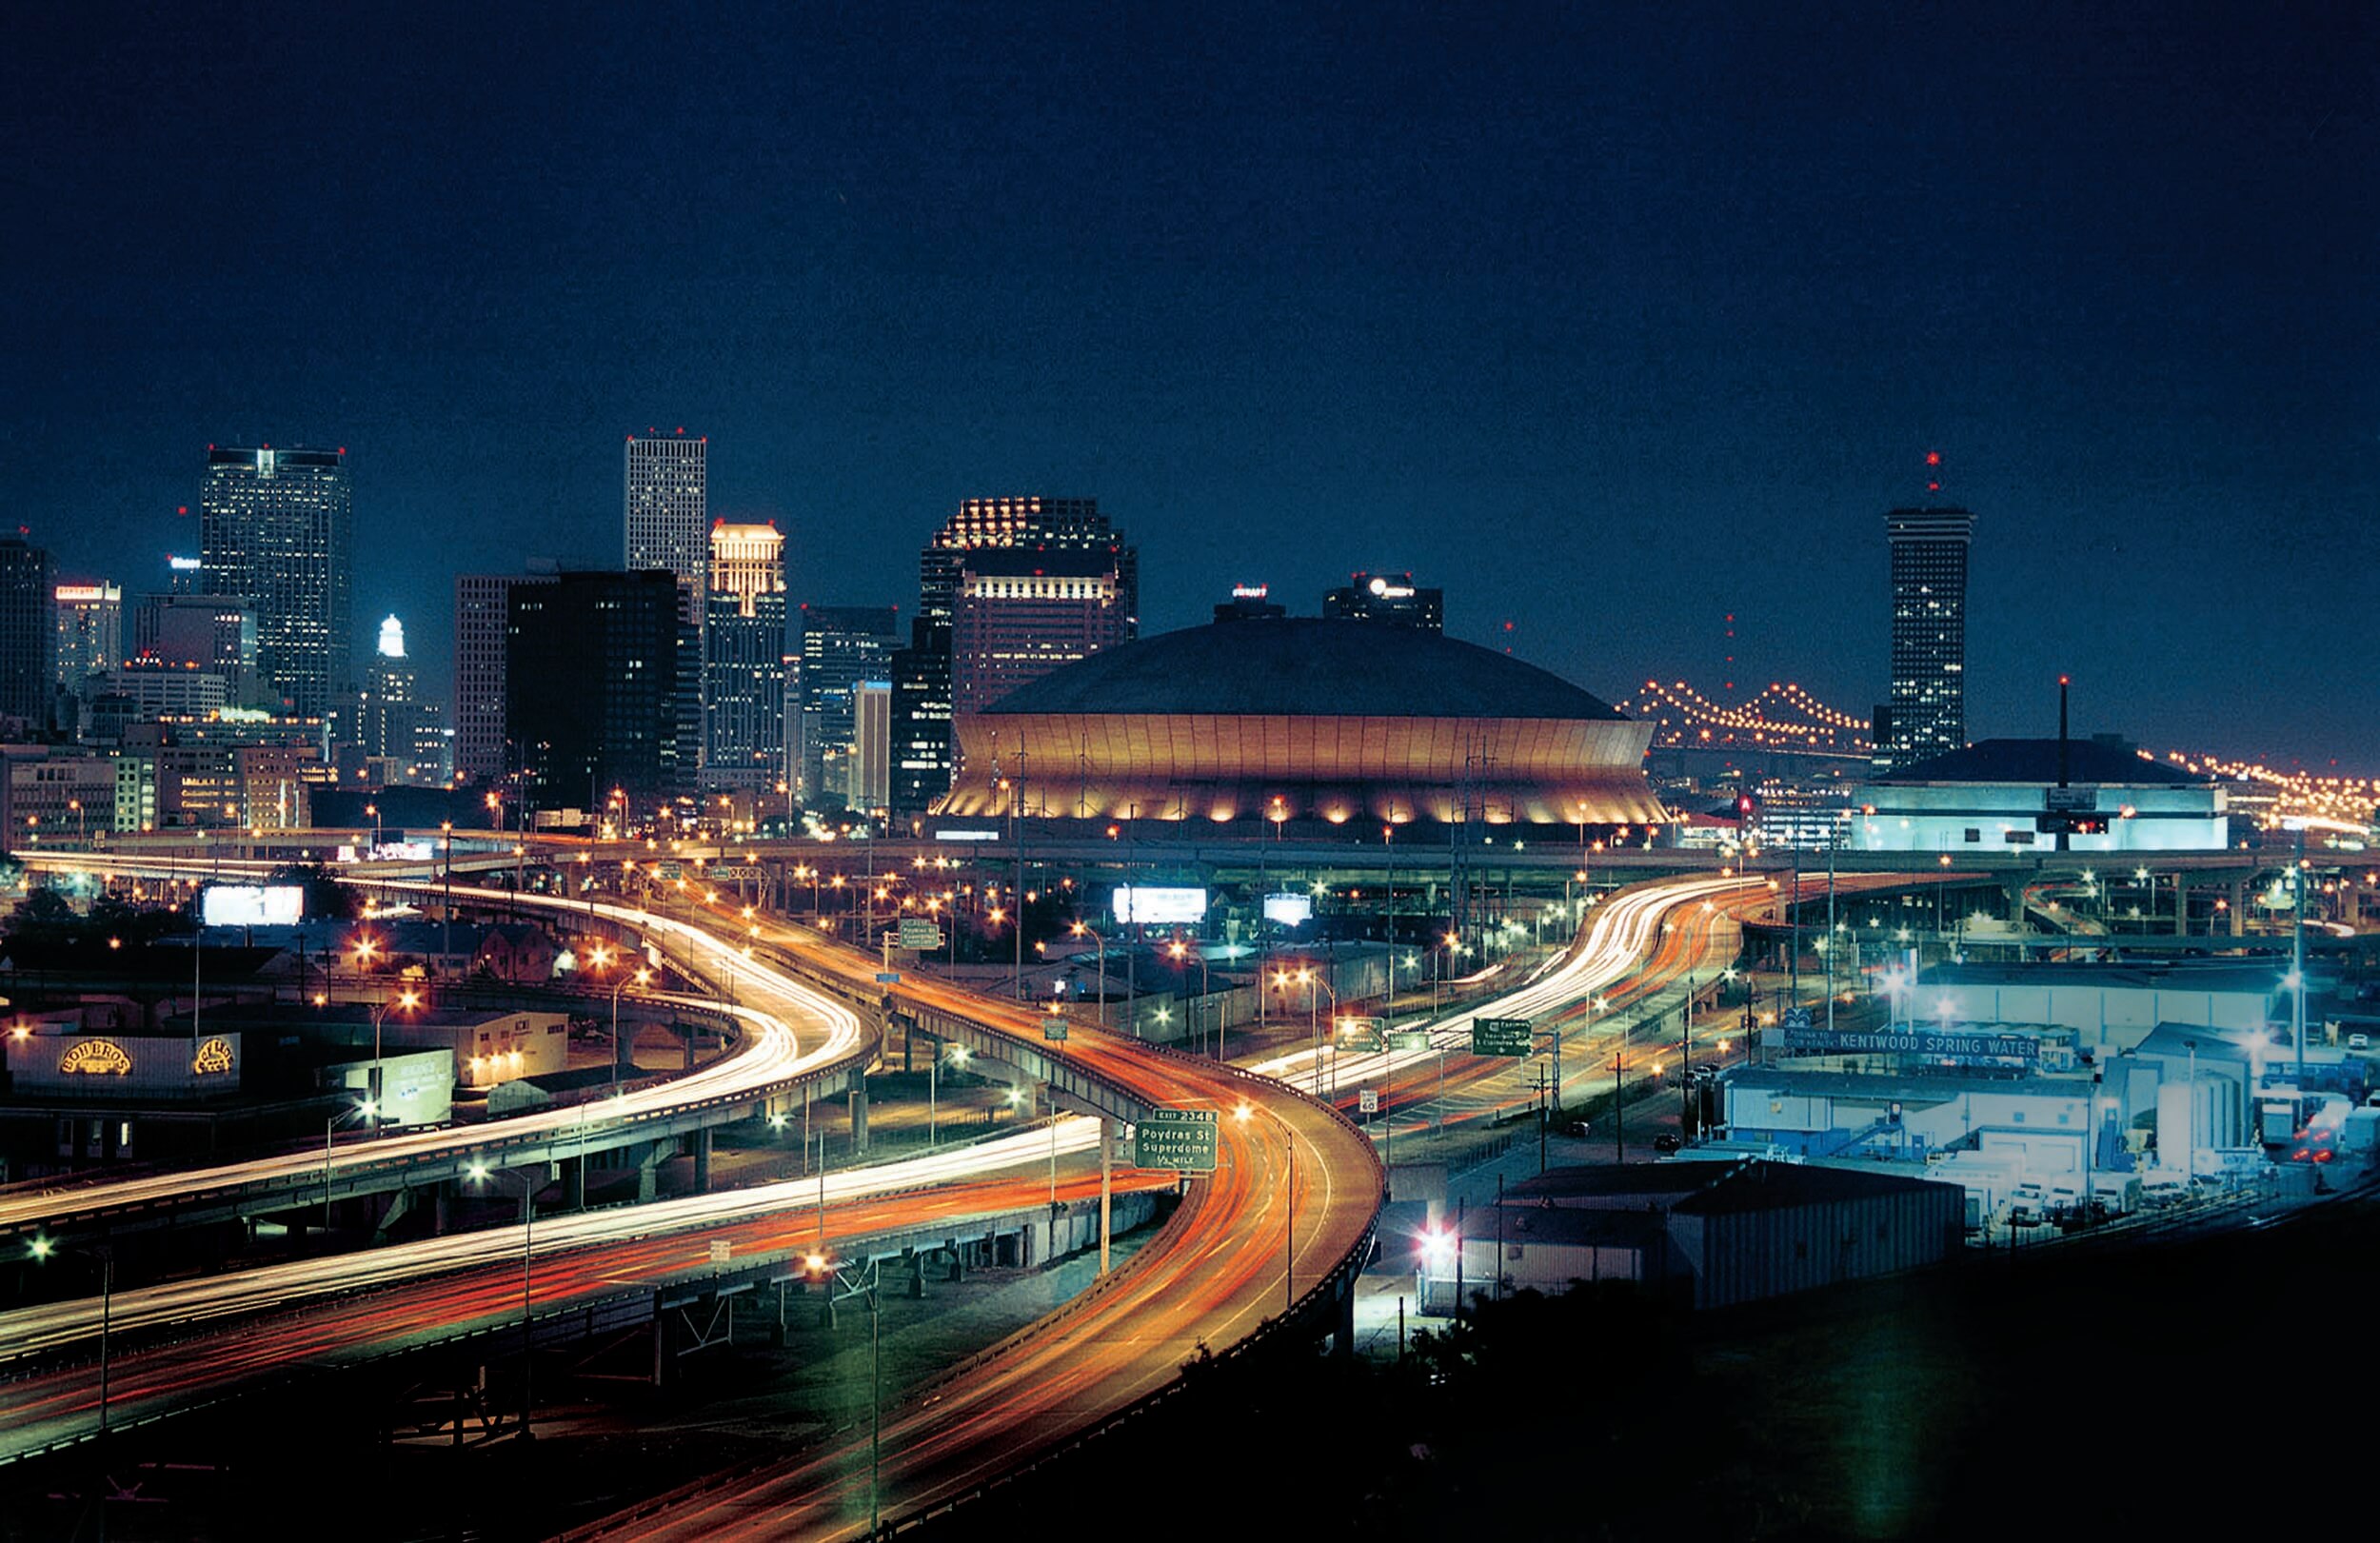 The Mercedes Benz superdome shines against the backdrop of the New Orleans skyline